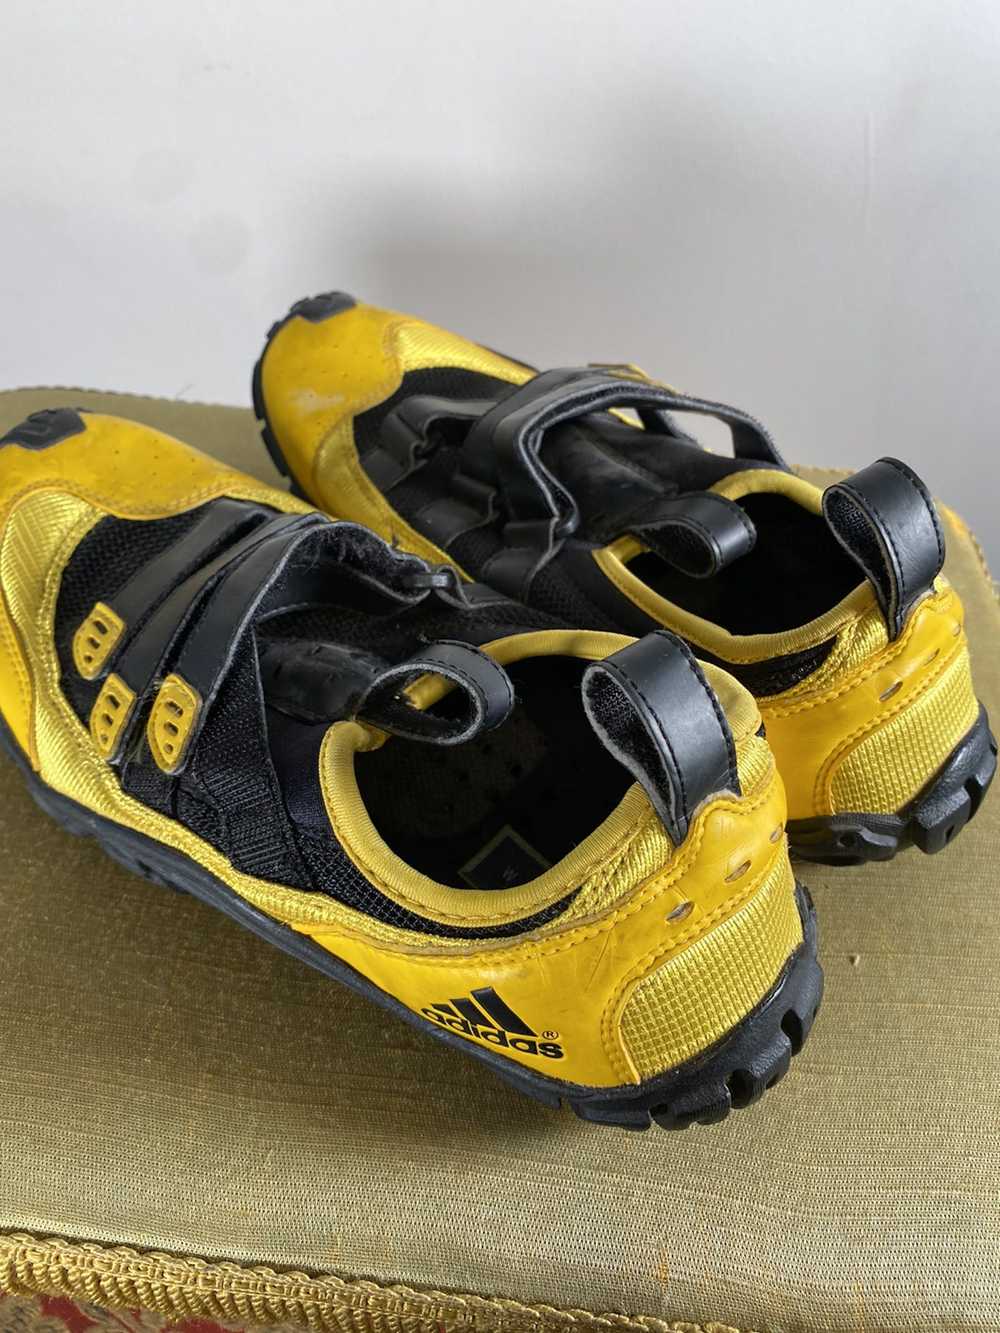 Vintage Velcro Water Shoes - image 4